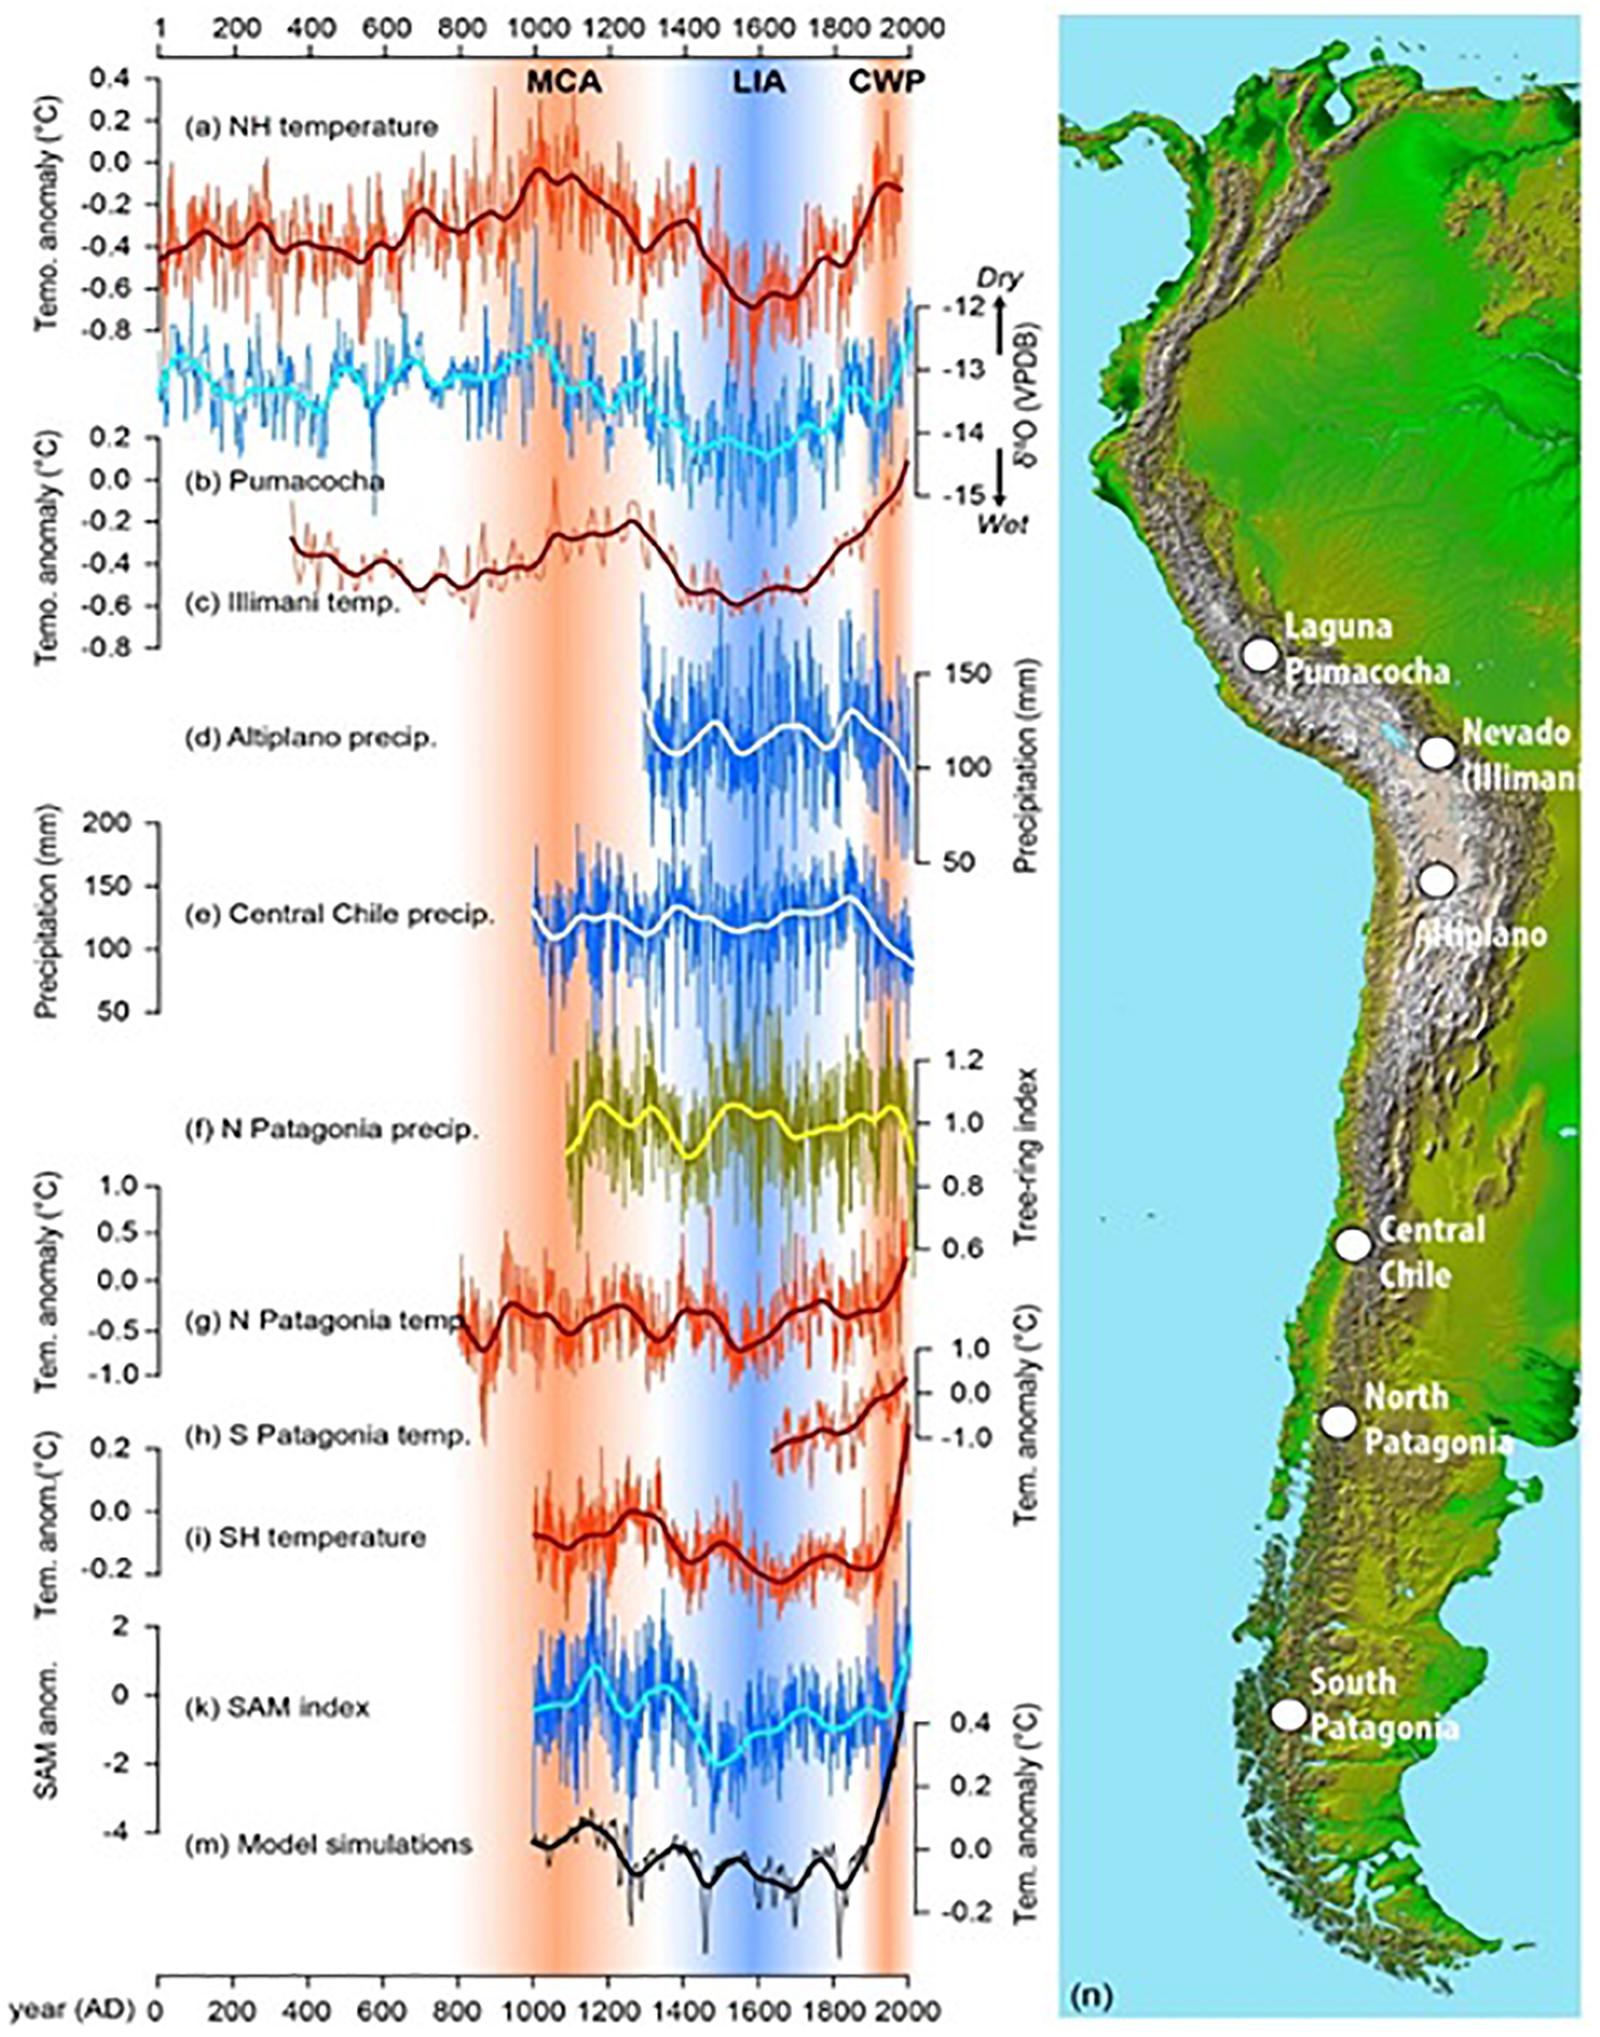 Patagonian biomes of southern Chile and Argentina (Note: Northern limit